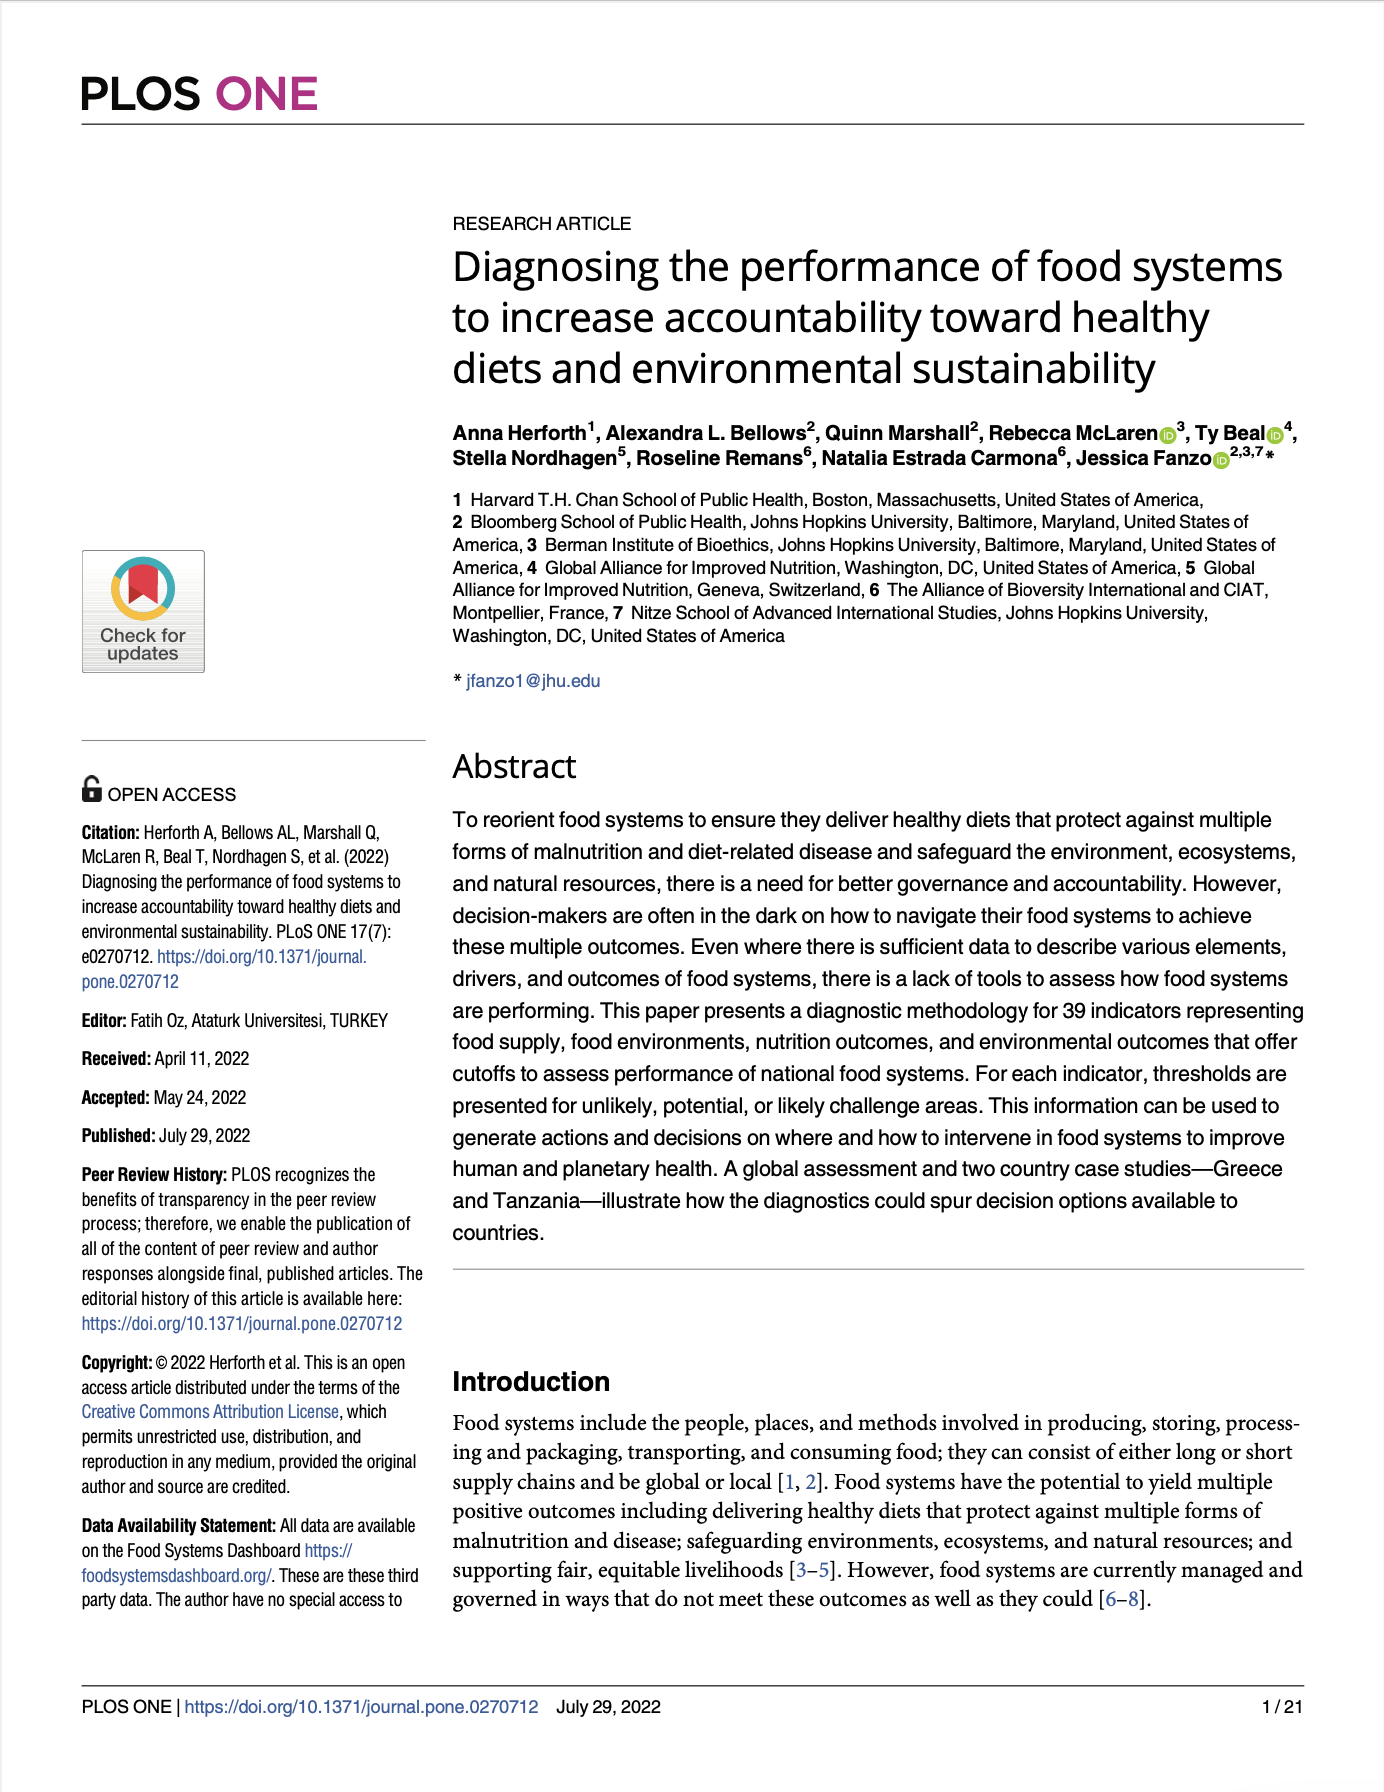 Diagnosing the performance of food systems to increase accountability toward healthy diets and environmental sustainability